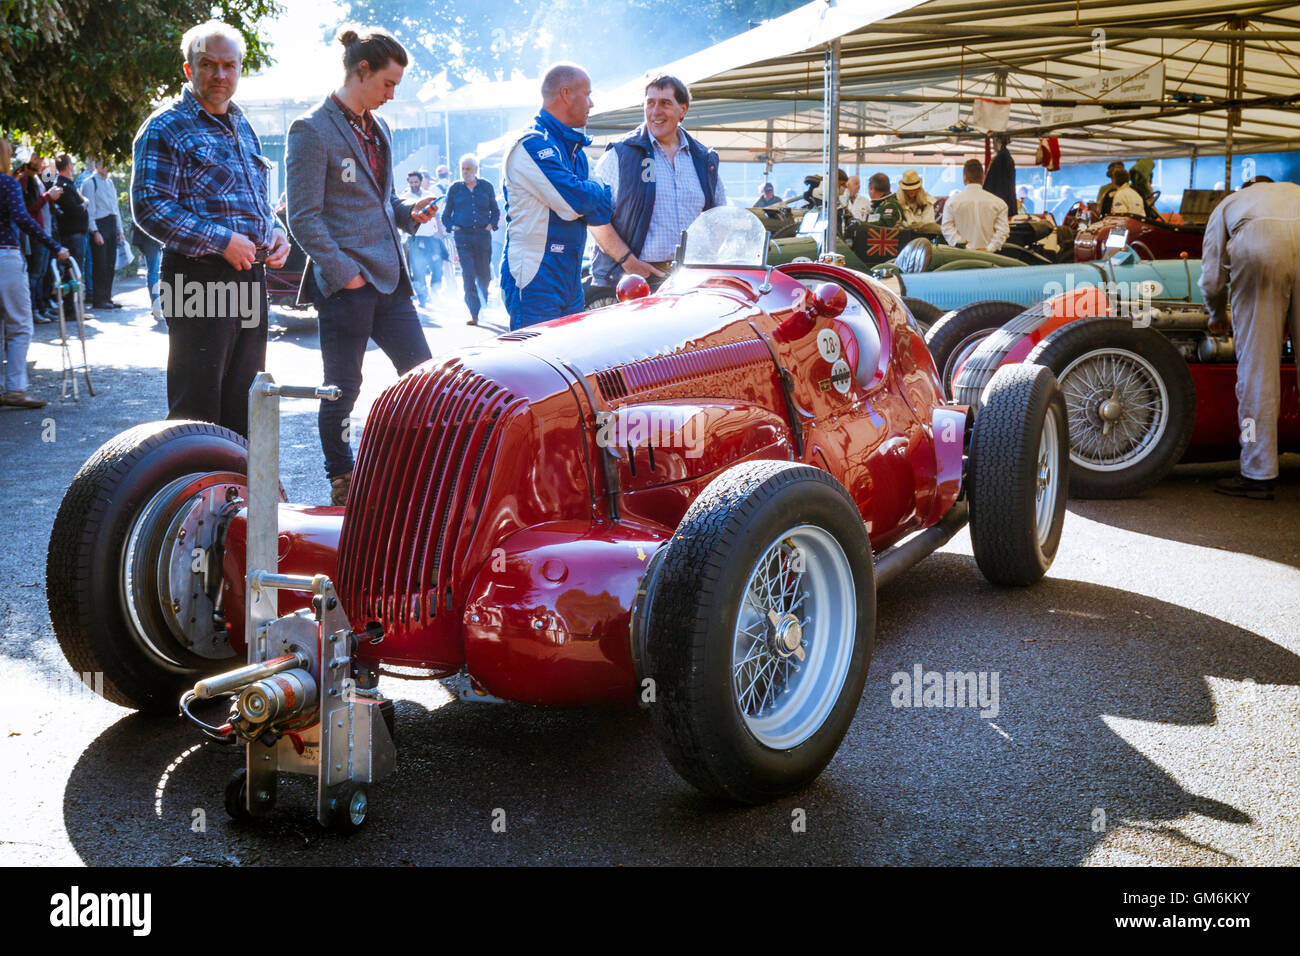 1935 Maserati V8R1 in the early morning light of the paddock, 2016 Goodwood Festival of Speed, Sussex, UK. Stock Photo